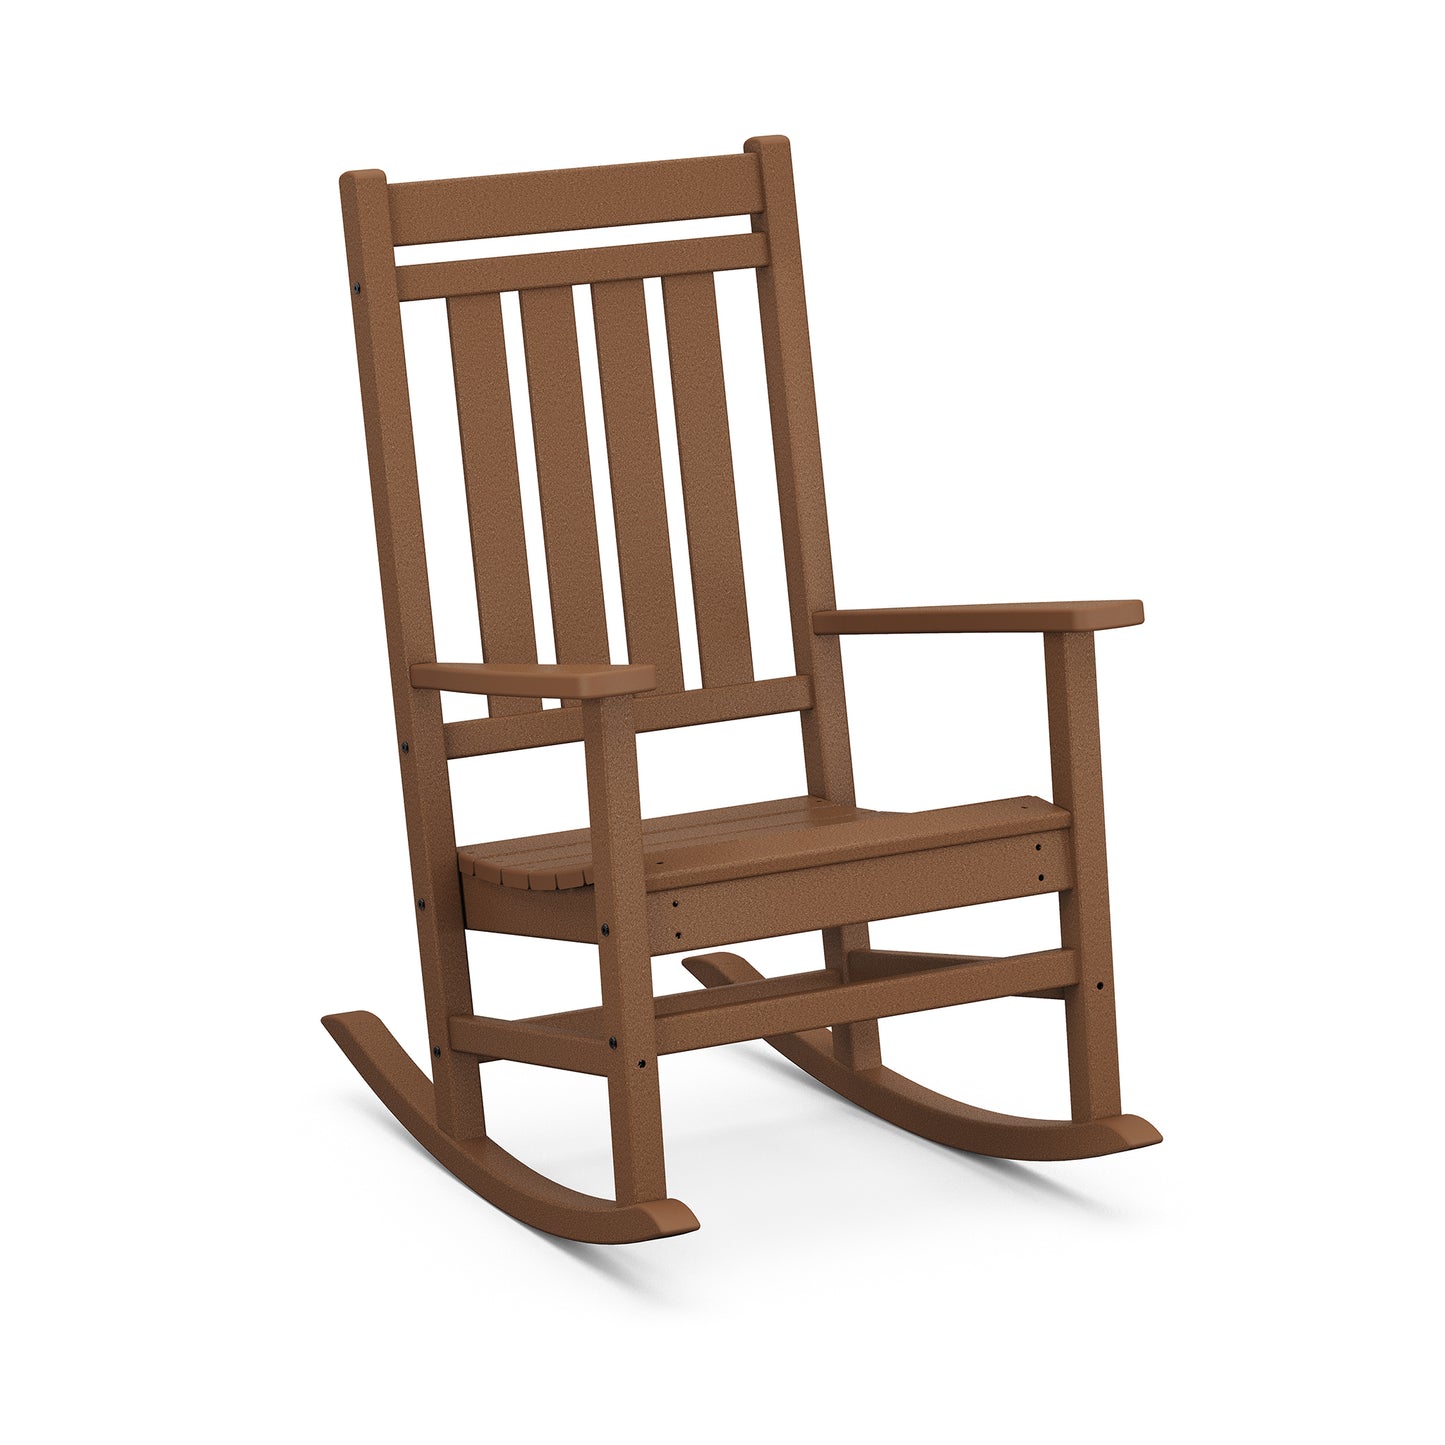 A POLYWOOD Estate Rocking Chair in a rich brown color, featuring a vertical slat back and an ergonomic seat with curved rockers, isolated on a white background.